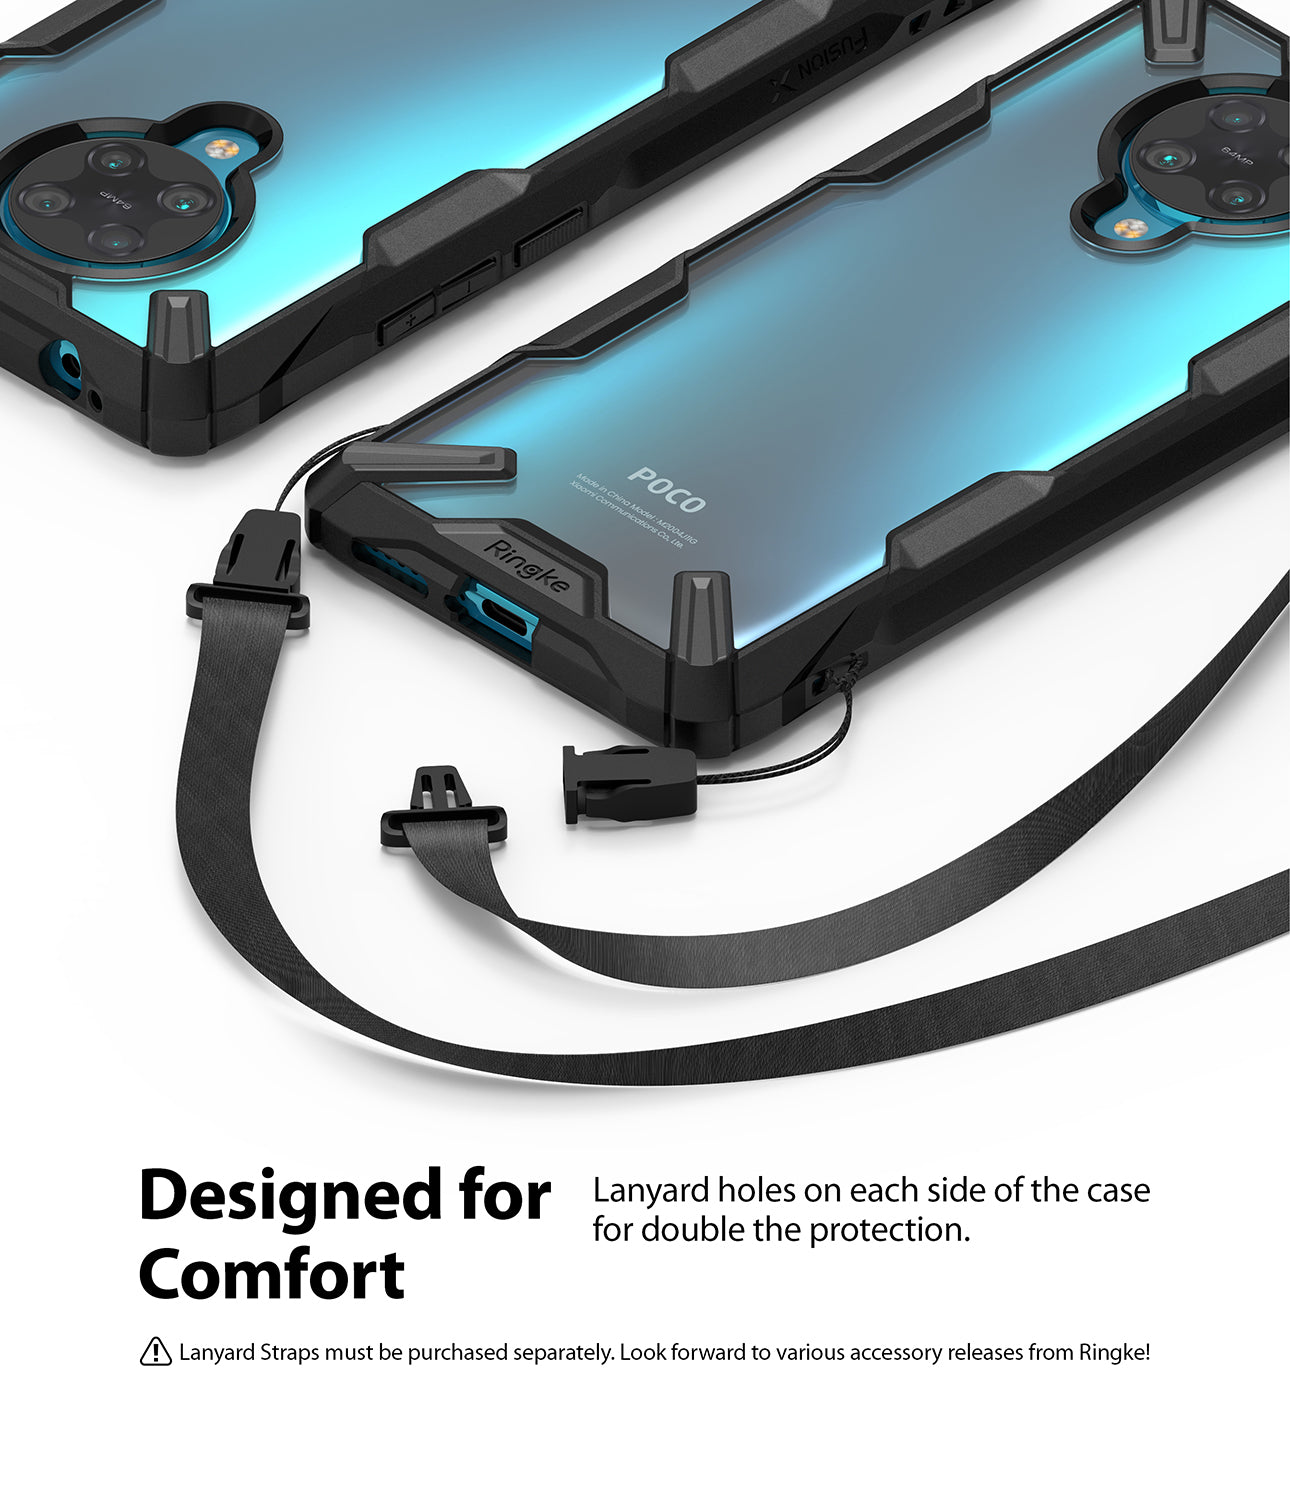 designed for comfort - lanyard holes on each side of the case for double protection